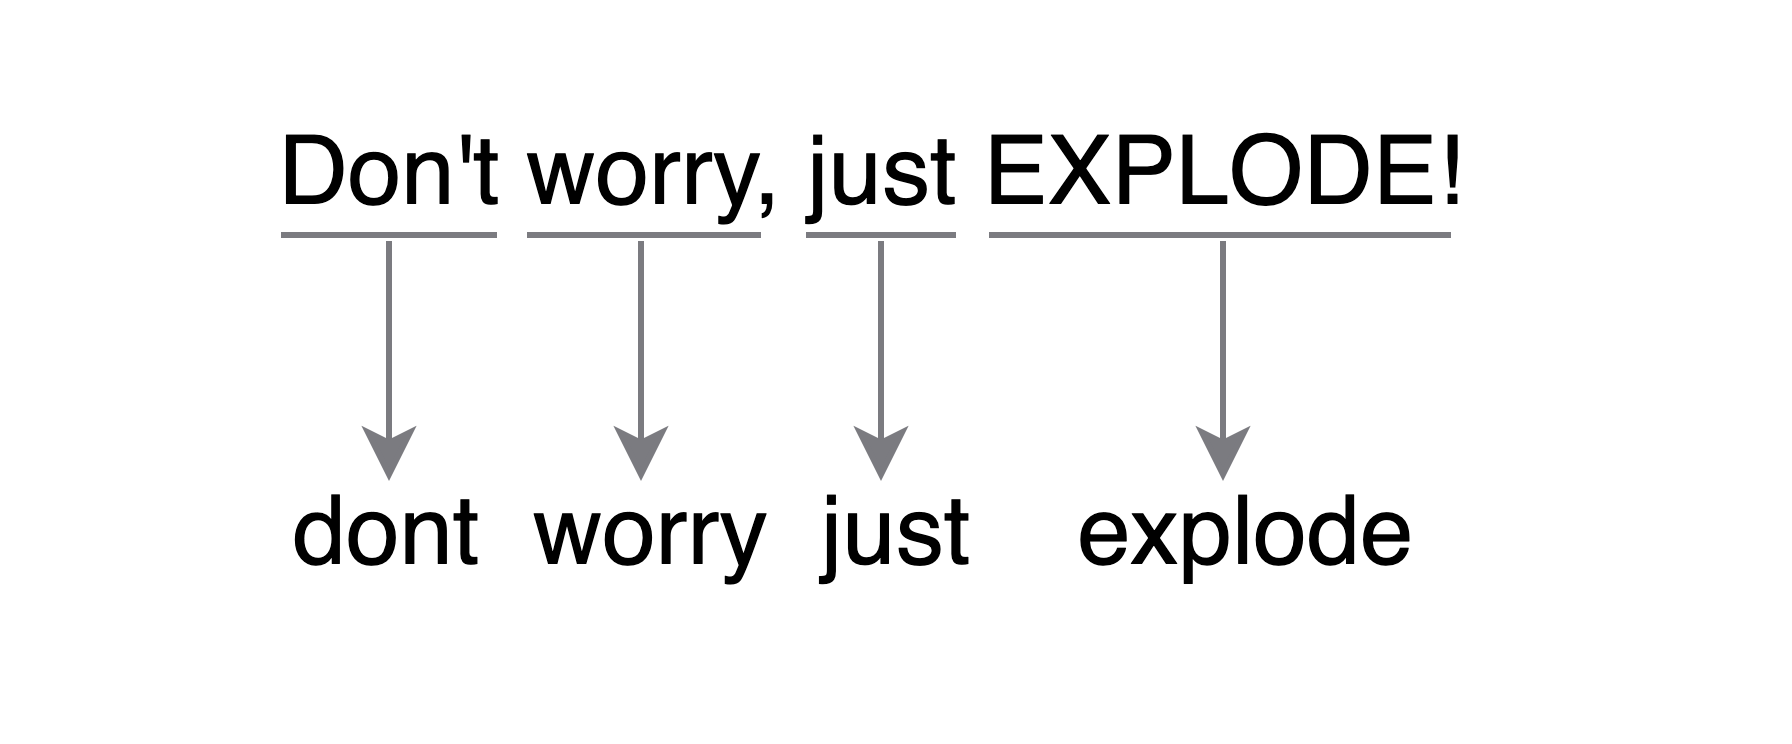 A diagram showing the words in the title don't worry just explode converted to words by making them lowercase and removing all punctuation marks.